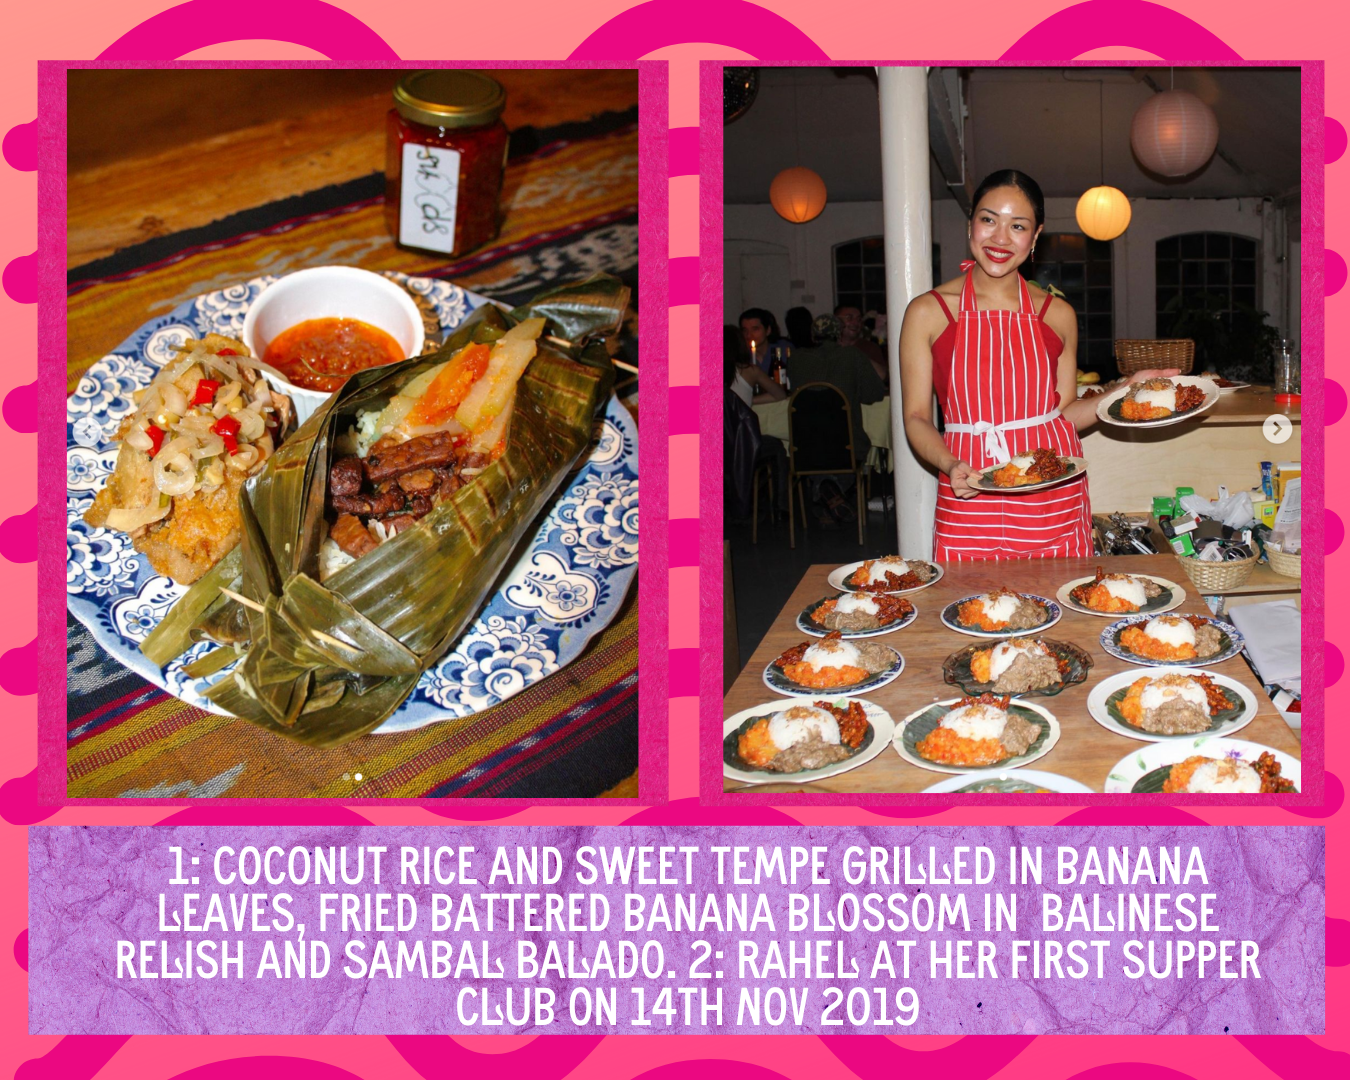 2 images, coconut rice and sweet tempe grilled on banana leaves; Rahel at her first supper club